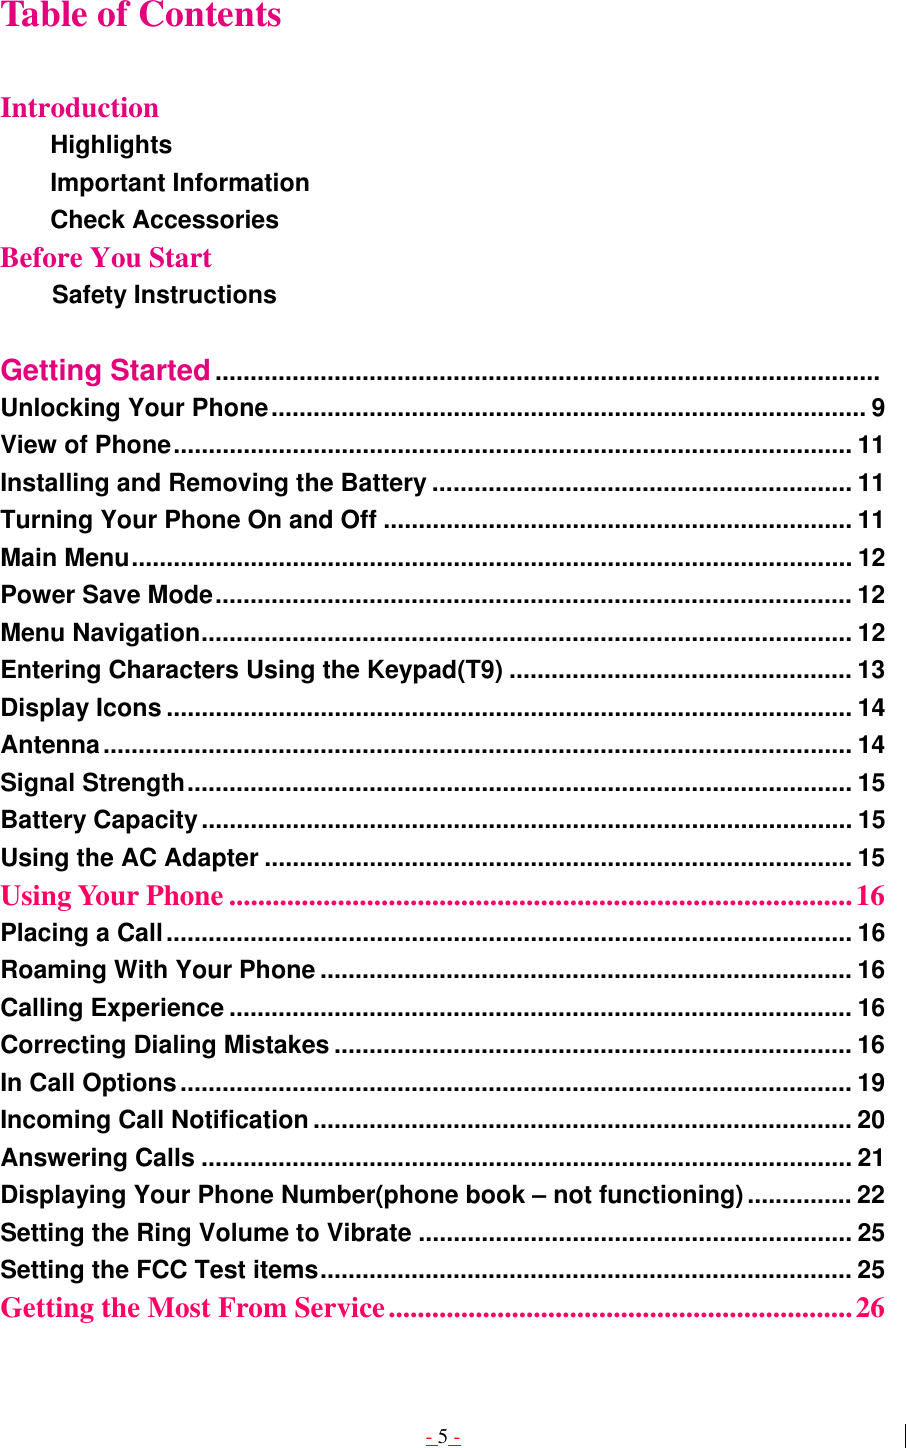 - 5 - Table of Contents  Introduction Highlights         Important Information        Check Accessories  Before You Start           Safety Instructions  Getting Started...............................................................................................  Unlocking Your Phone..................................................................................... 9 View of Phone................................................................................................. 11 Installing and Removing the Battery ............................................................ 11 Turning Your Phone On and Off ................................................................... 11 Main Menu....................................................................................................... 12 Power Save Mode........................................................................................... 12 Menu Navigation............................................................................................. 12 Entering Characters Using the Keypad(T9) ................................................. 13 Display Icons .................................................................................................. 14 Antenna........................................................................................................... 14 Signal Strength............................................................................................... 15 Battery Capacity............................................................................................. 15 Using the AC Adapter .................................................................................... 15 Using Your Phone ......................................................................................16 Placing a Call.................................................................................................. 16 Roaming With Your Phone ............................................................................ 16 Calling Experience ......................................................................................... 16 Correcting Dialing Mistakes .......................................................................... 16 In Call Options................................................................................................ 19 Incoming Call Notification ............................................................................. 20 Answering Calls ............................................................................................. 21 Displaying Your Phone Number(phone book – not functioning)............... 22 Setting the Ring Volume to Vibrate .............................................................. 25 Setting the FCC Test items............................................................................ 25 Getting the Most From Service................................................................26 